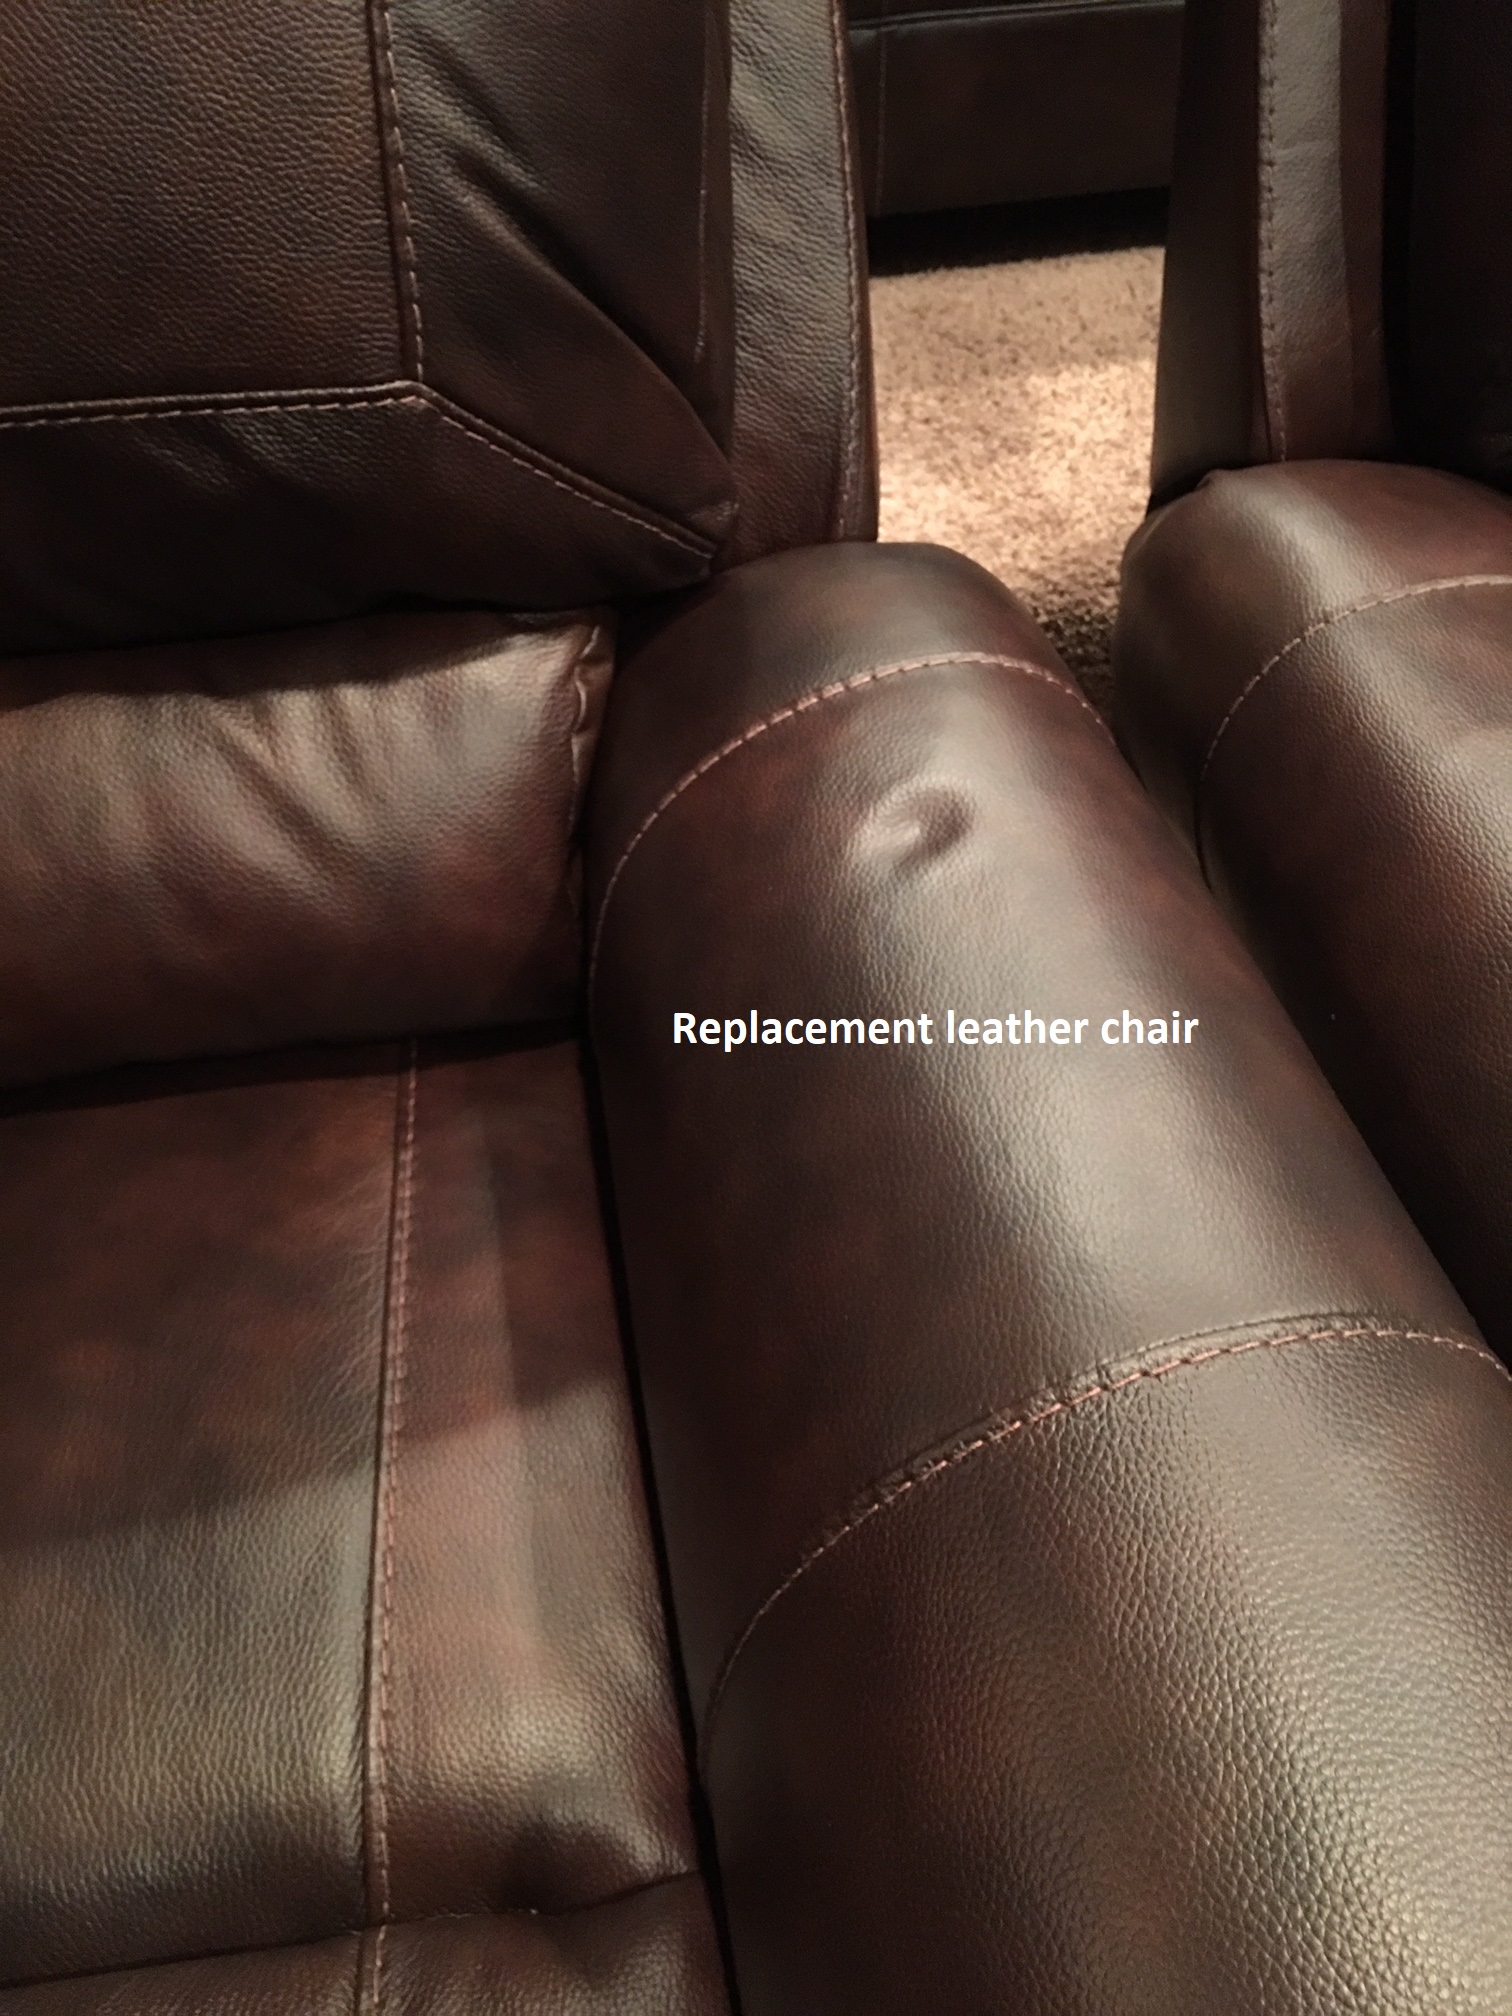 Top 10 Reviews Of Ashley Furniture Recliners